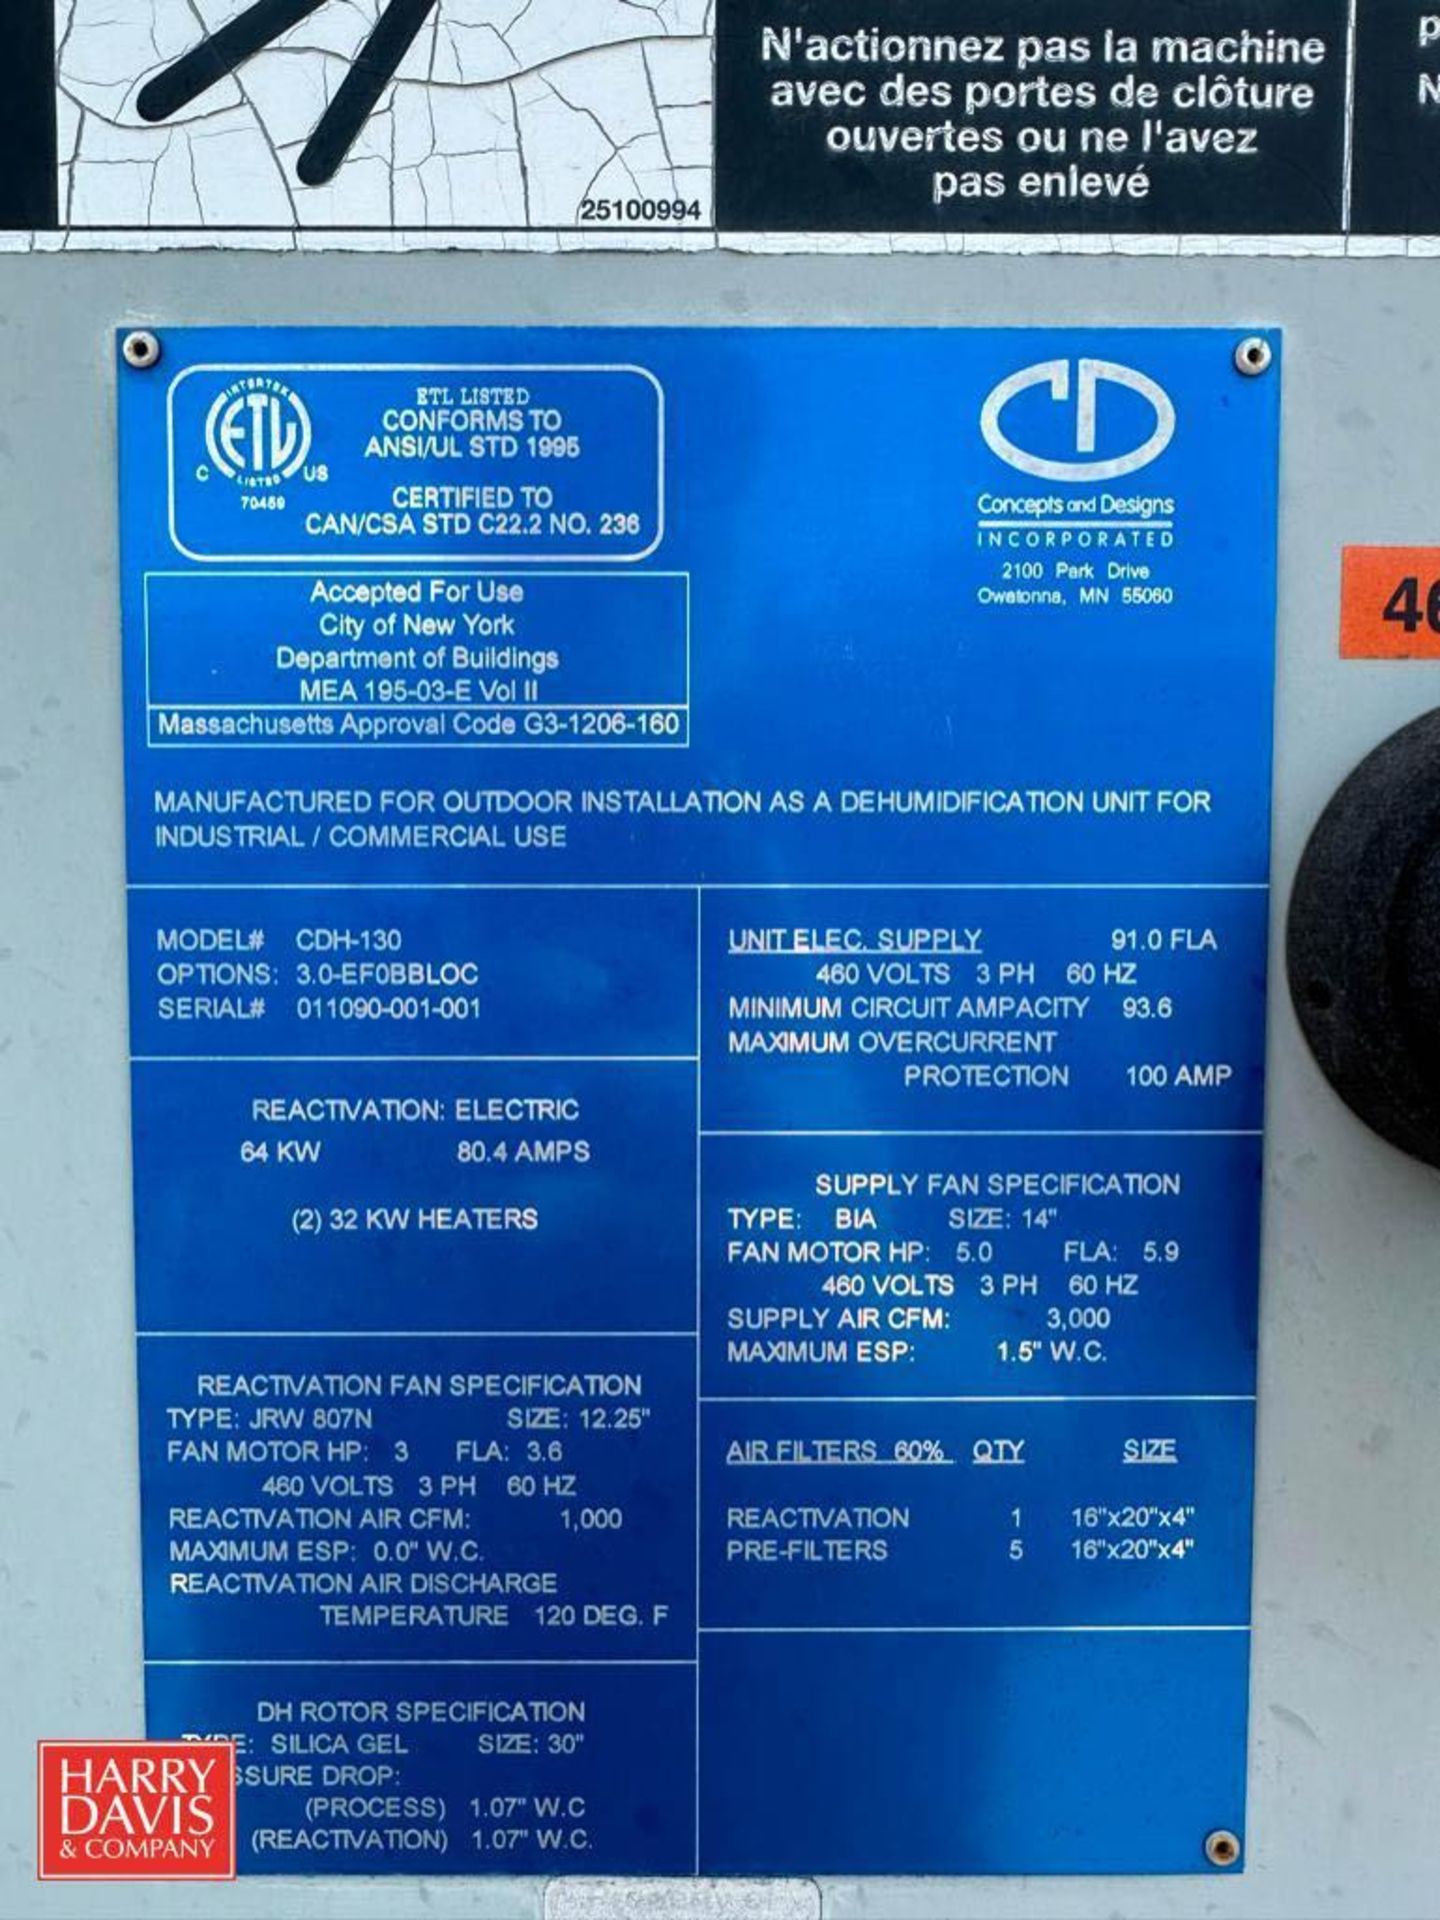 Concepts and Designs Dehumidifier, Model: CDH-130, S/N: 011090-001-001 - Image 2 of 2